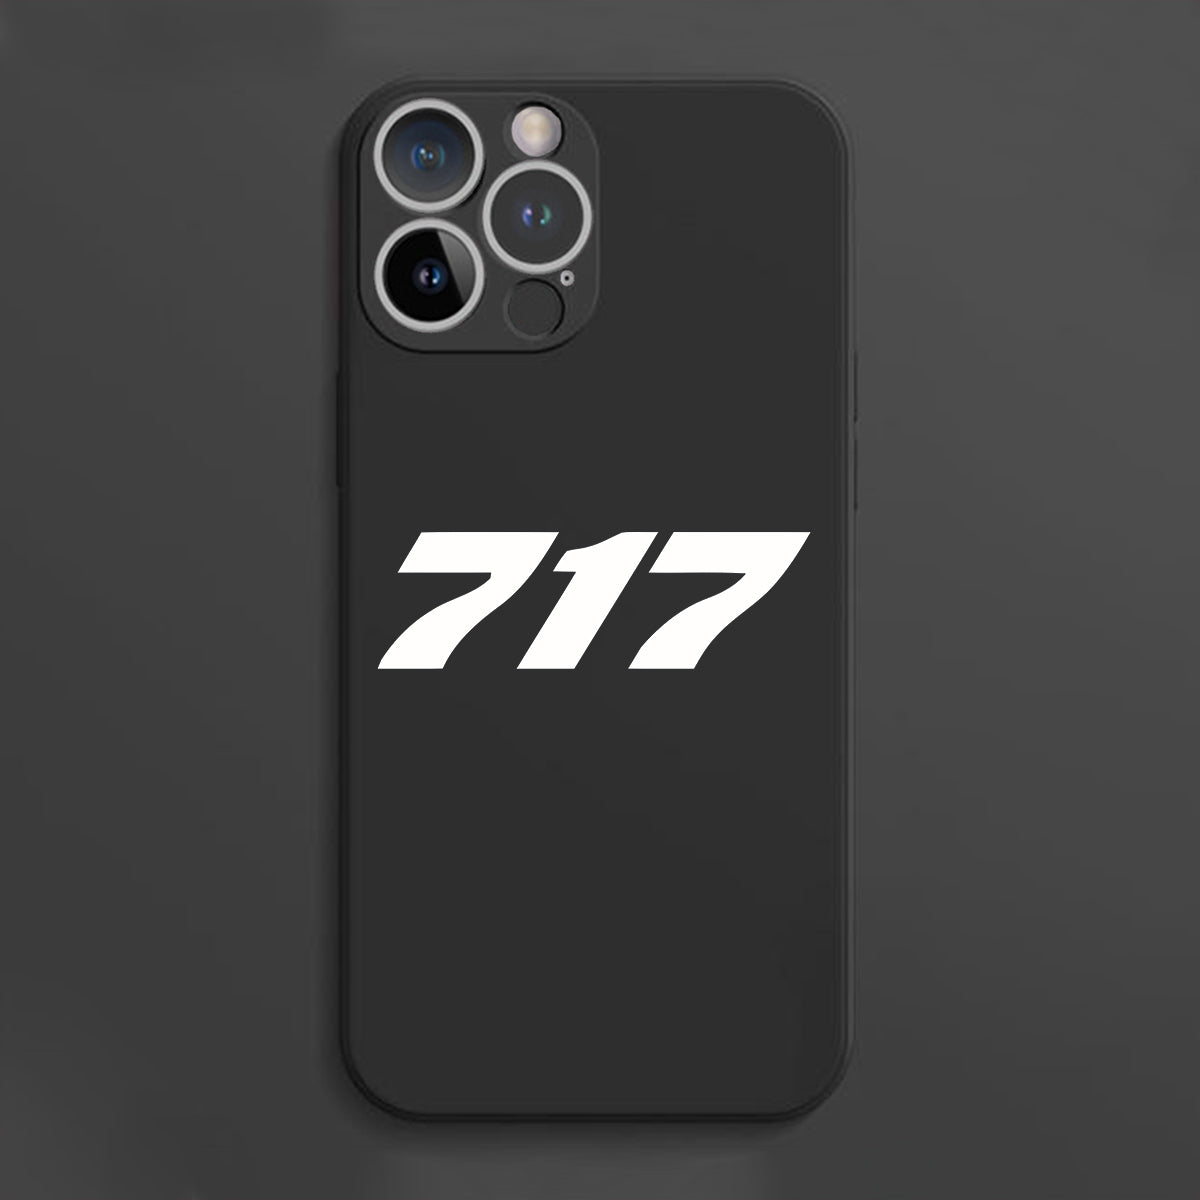 717 Flat Text Designed Soft Silicone iPhone Cases